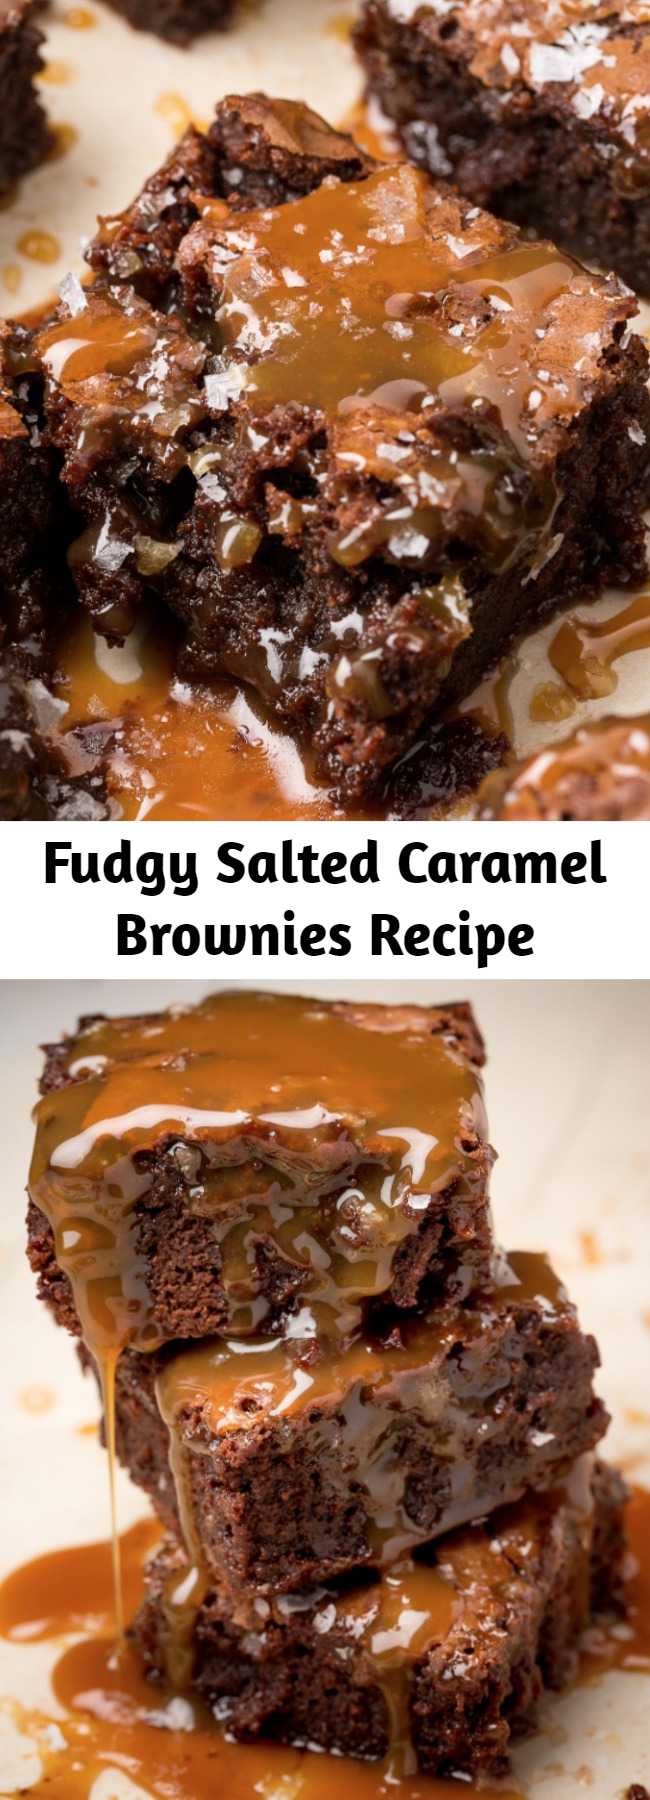 Fudgy Salted Caramel Brownies Recipe - These salted Caramel Brownies are the most beautiful mess you'll ever eat.